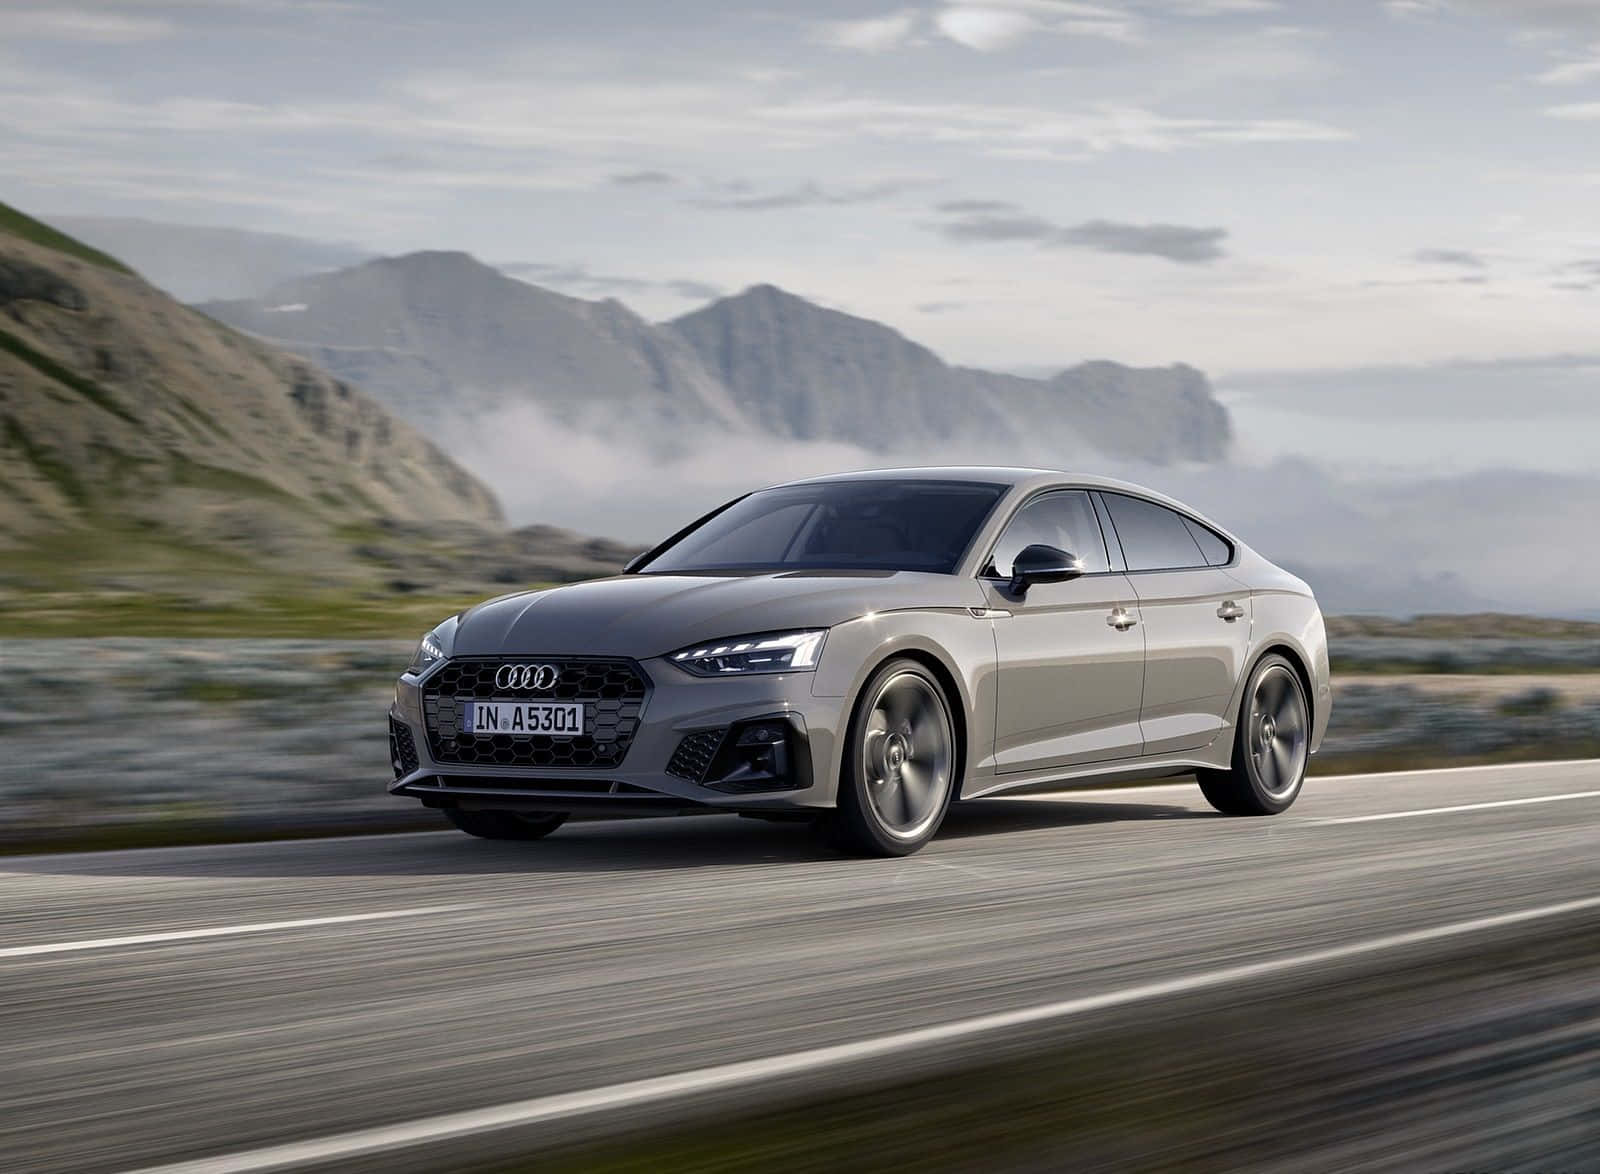 Sleek and Elegant Audi A5 in a Breathtaking Outdoor Setting Wallpaper